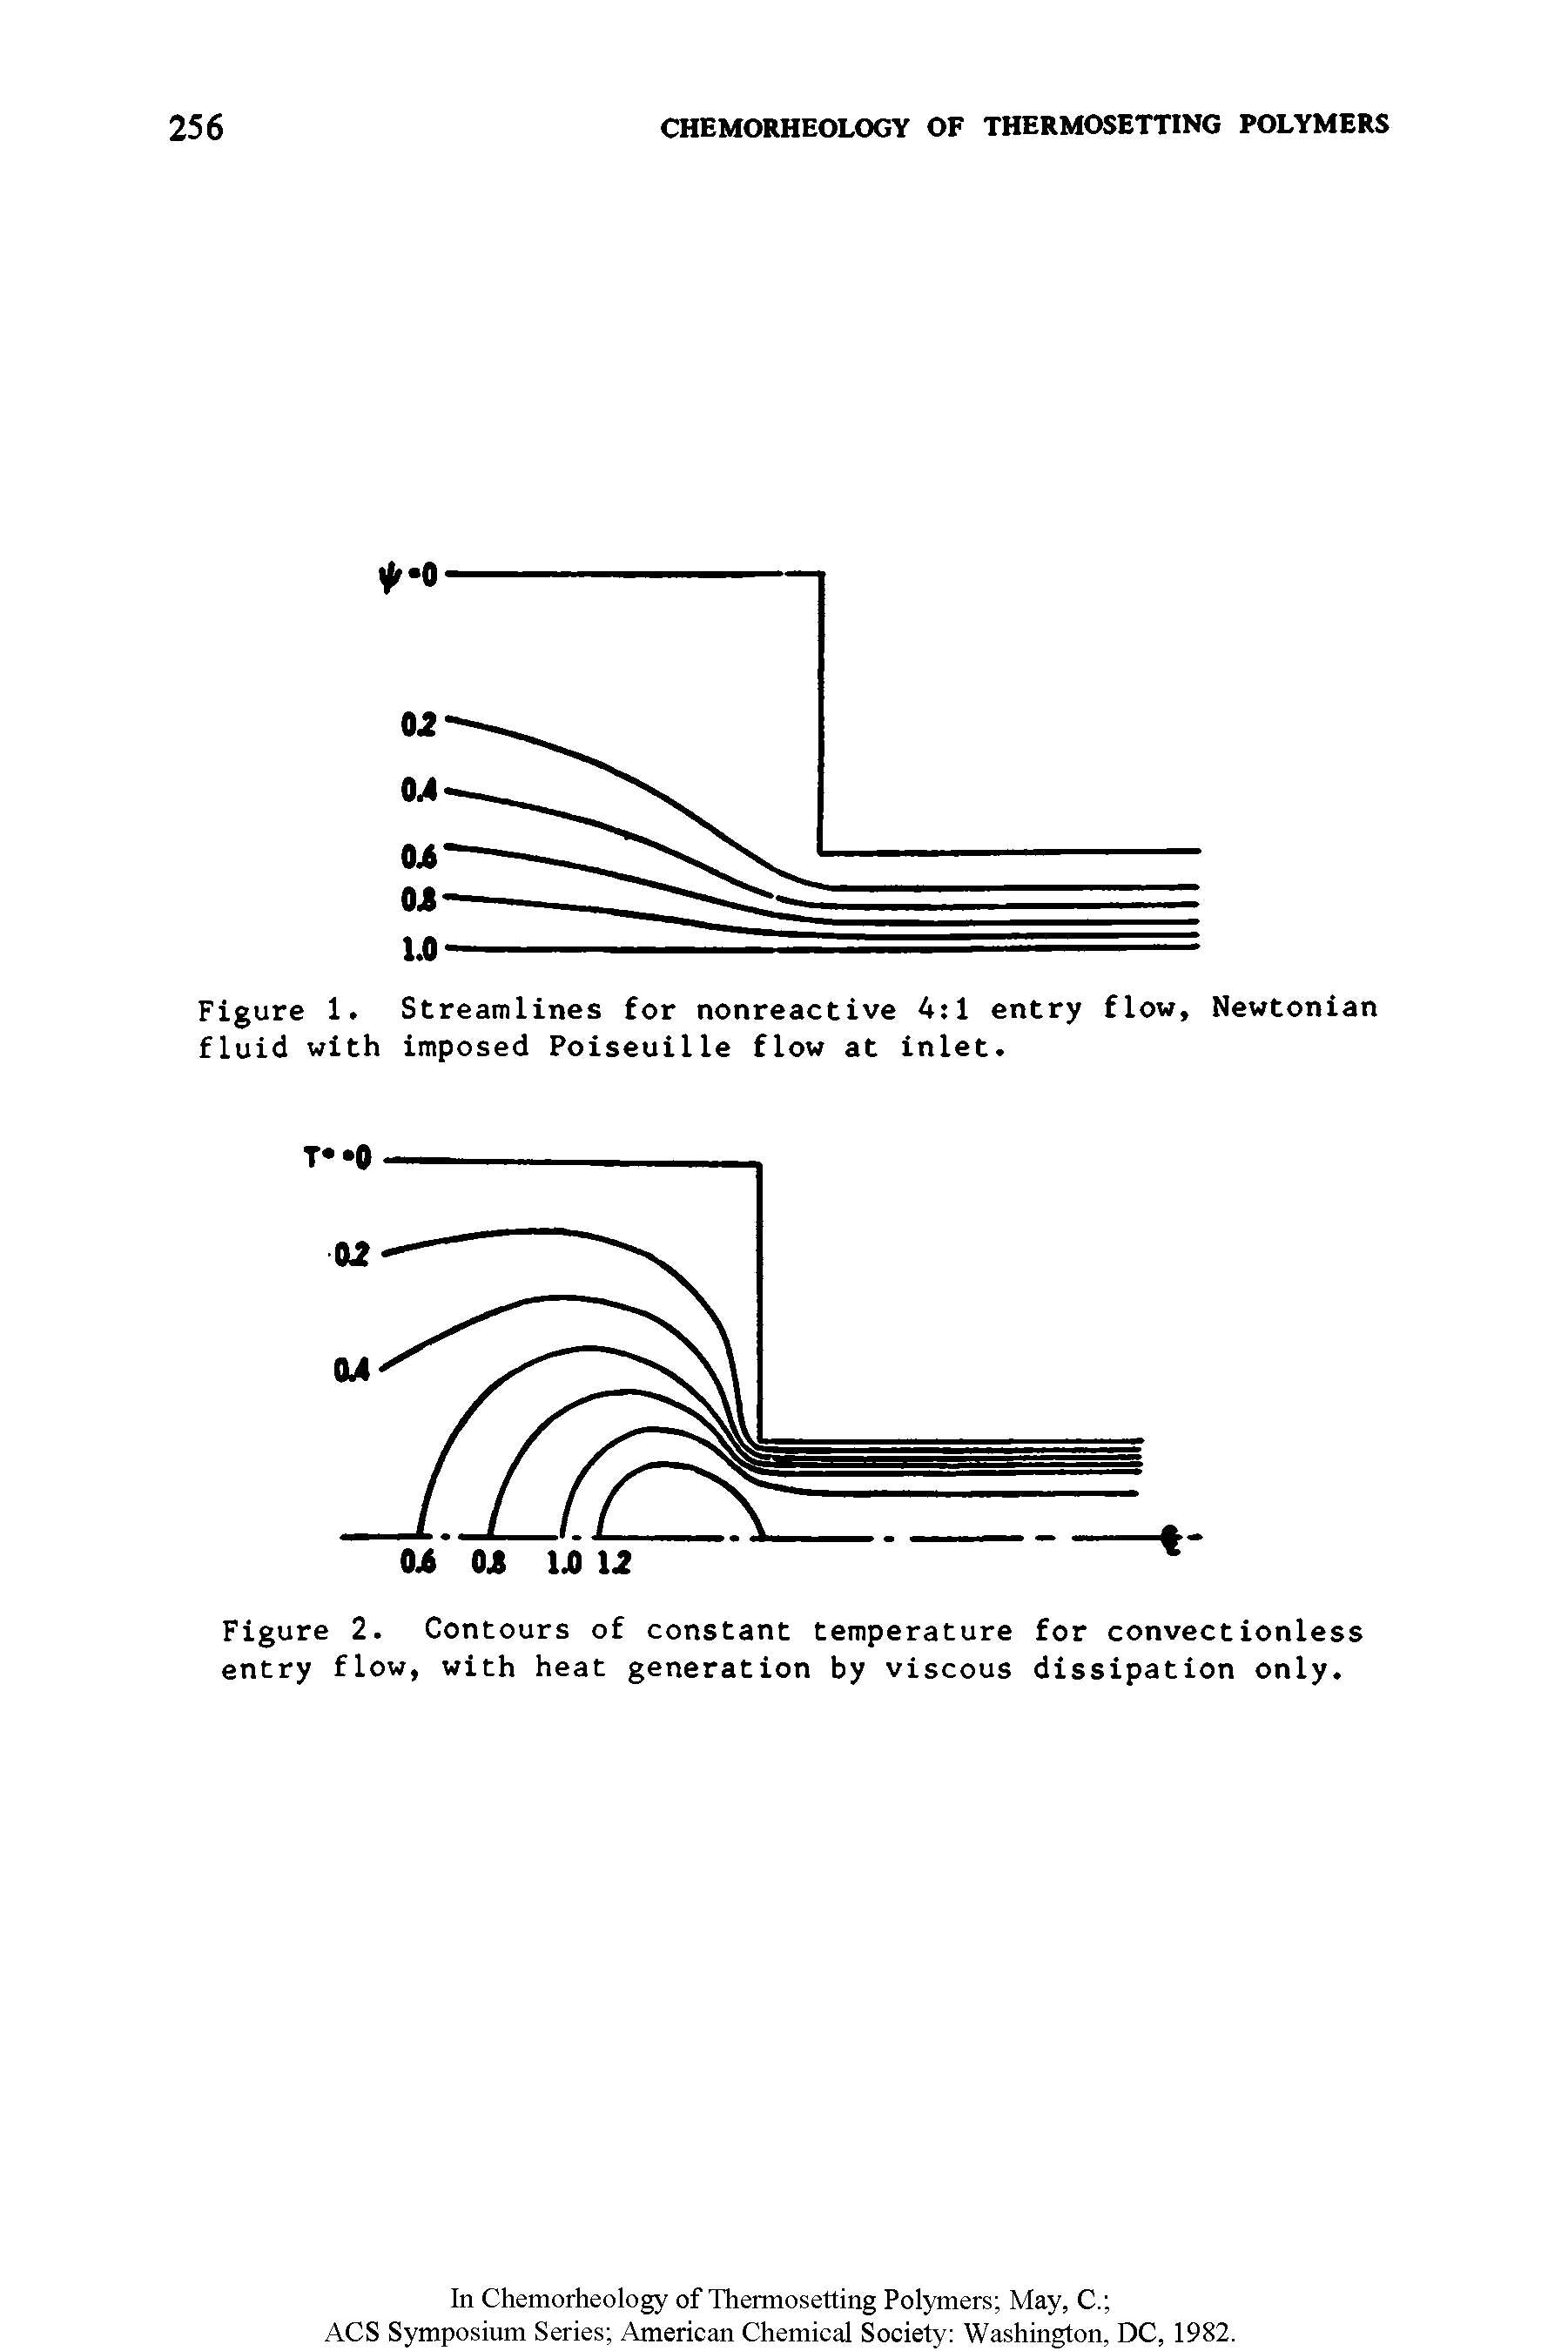 Figure 1. Streamlines for nonreactive 4 1 entry flow, Newtonian fluid with imposed Poiseuille flow at inlet.